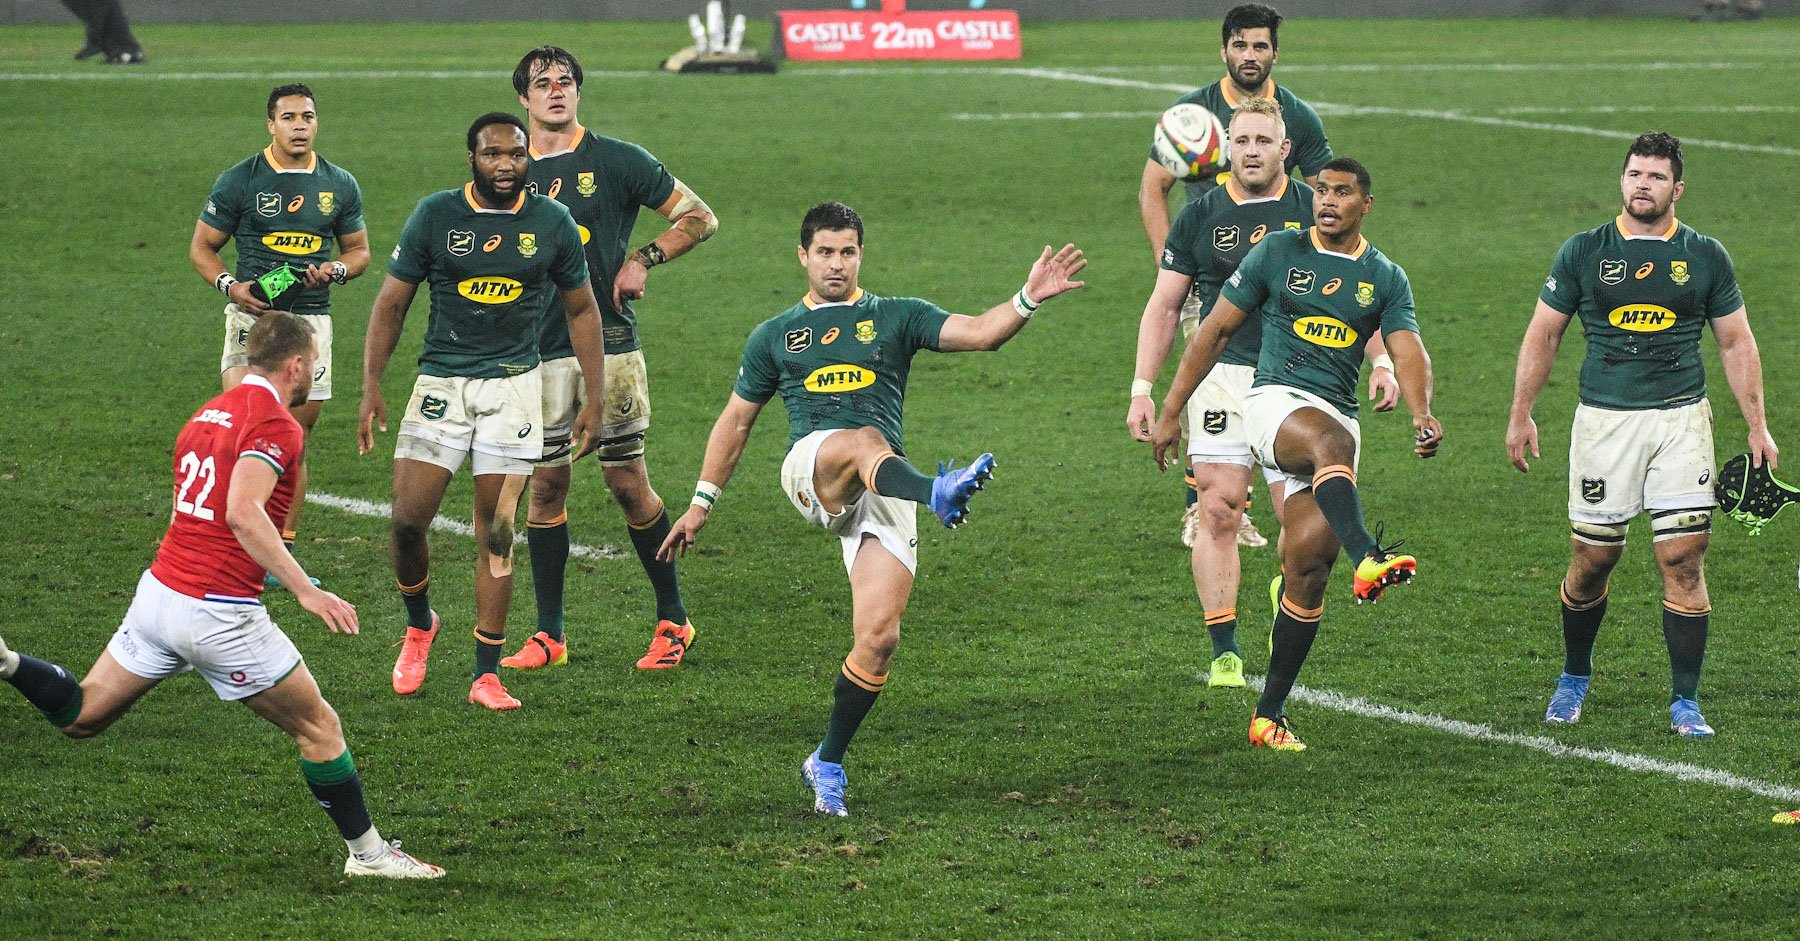 Steyn sends the ball into touch moments after he sealned the 2021 series win over the British & Irish Lions with a penalty goal (just like he did 12 years earlier).